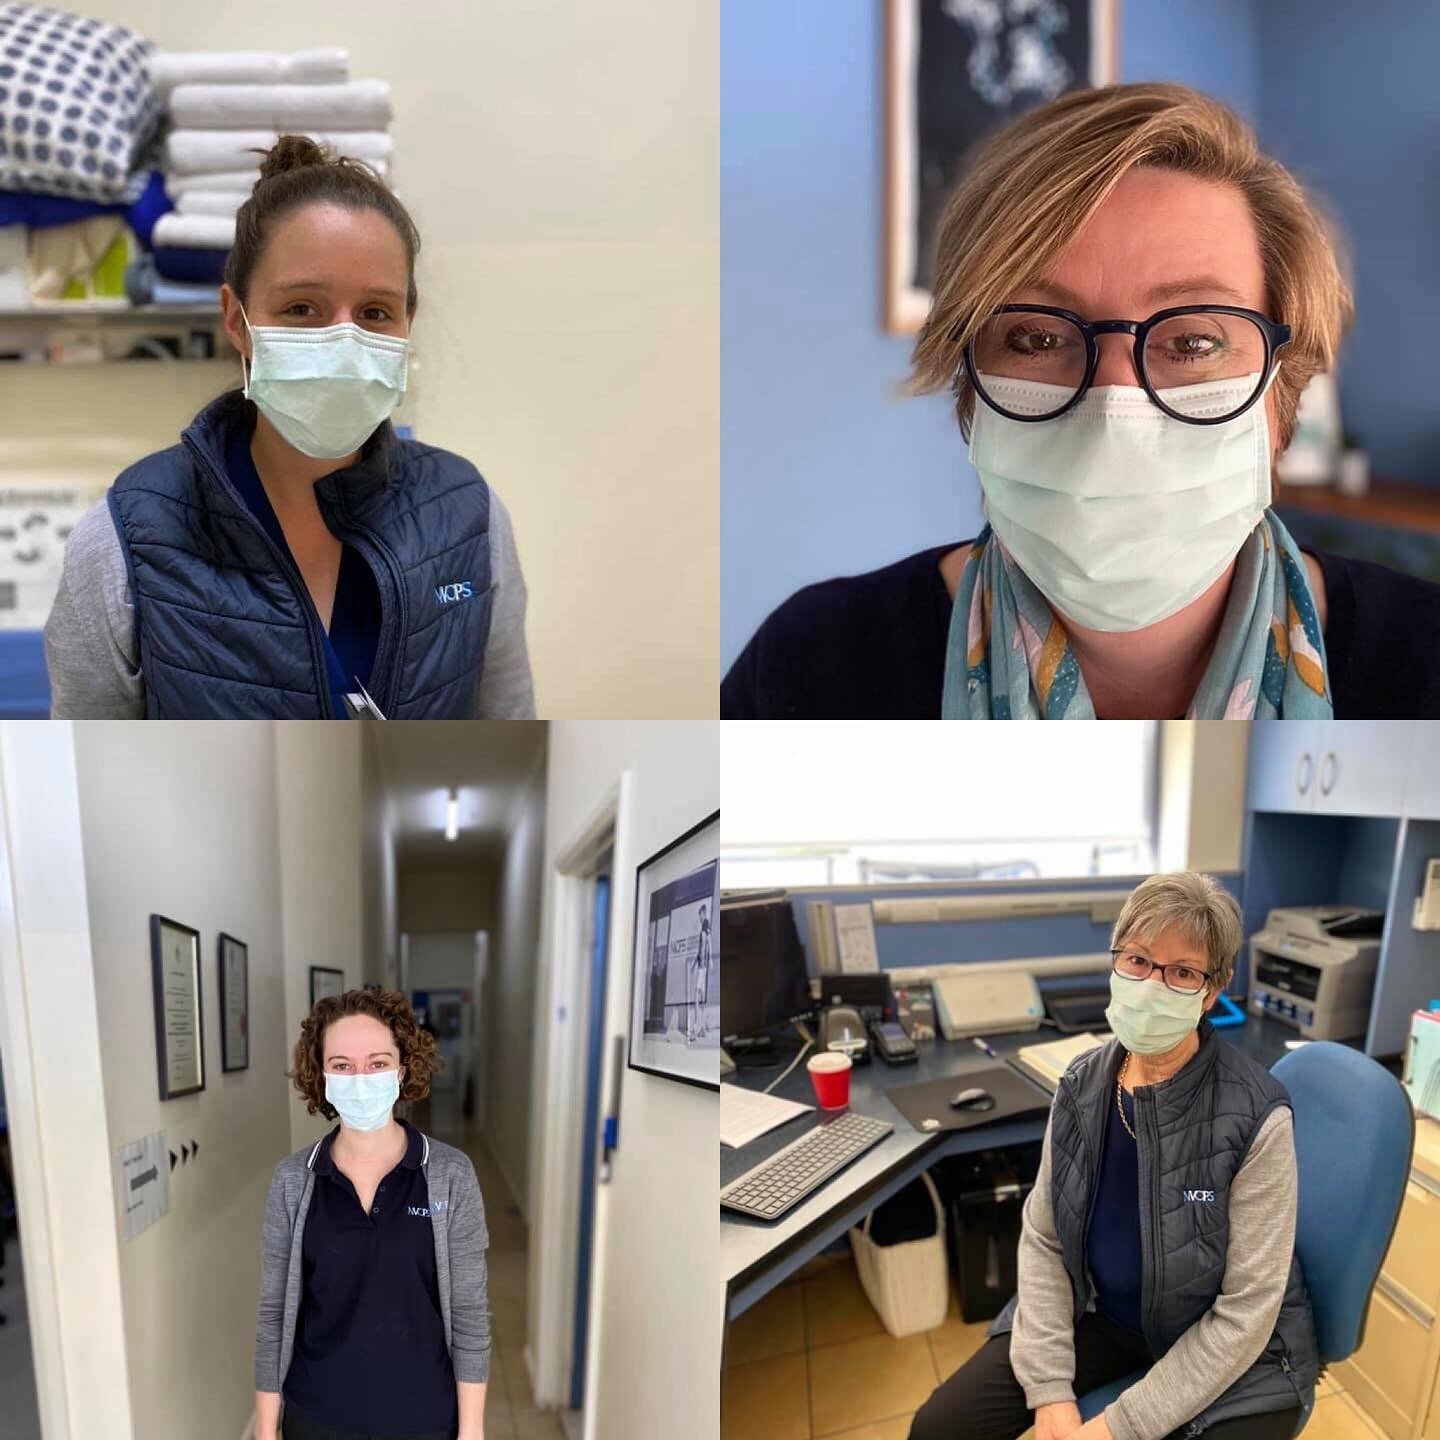 NVOPS staff are keeping our clients, workplace and community safe, looking fabulous in our masks #covidsafe #orthoticsandprosthetics #stayingsafe #shepparton